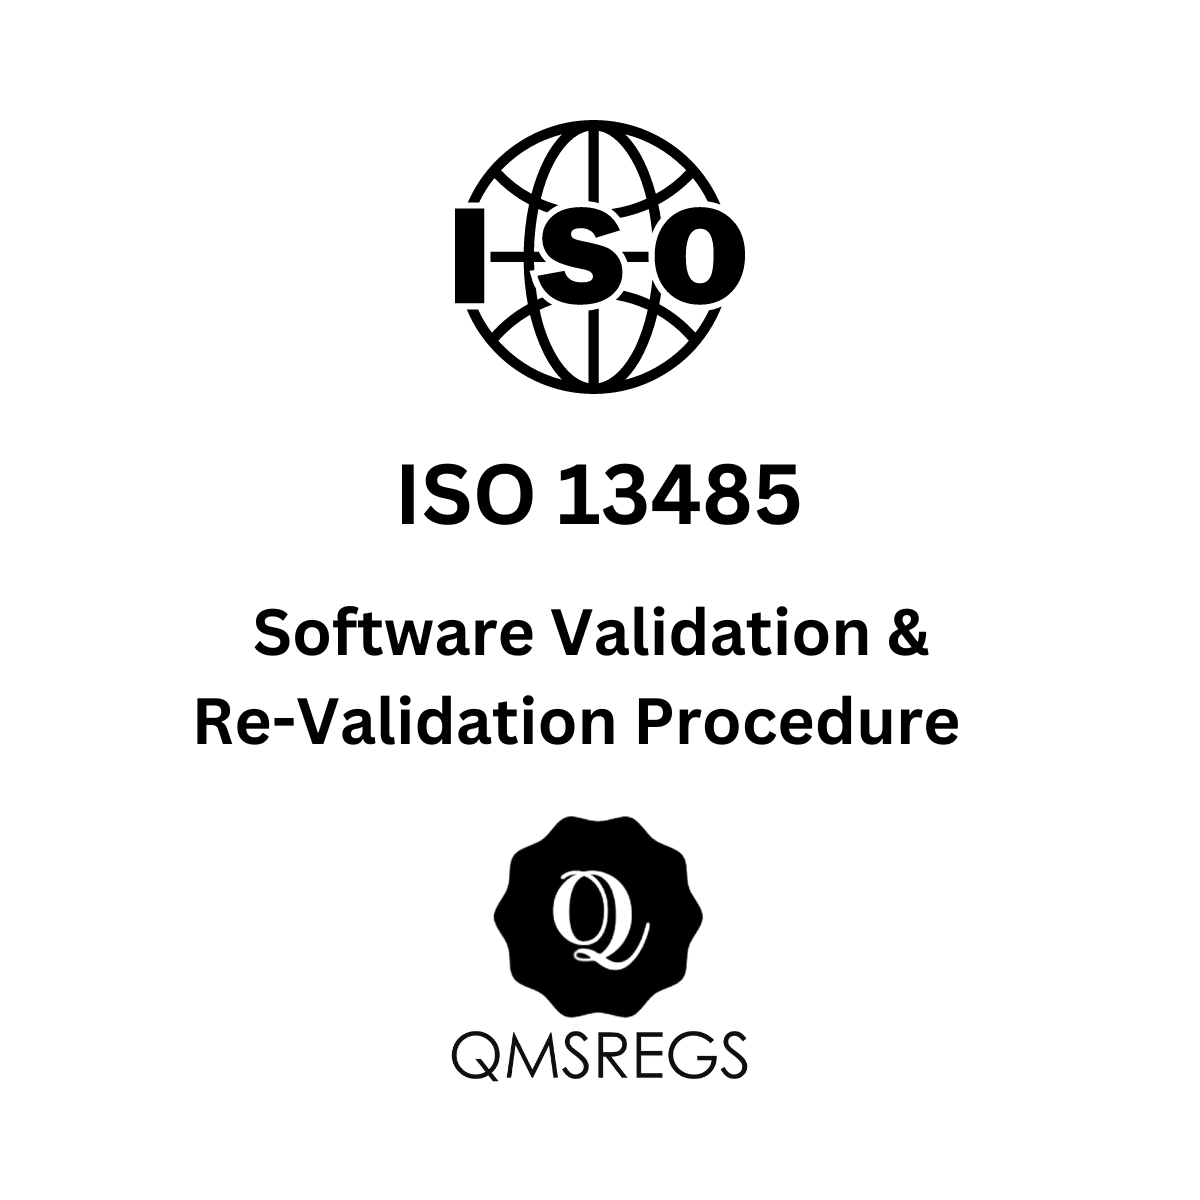 ISO 13485 Software Validation and Re-validation Procedure Template